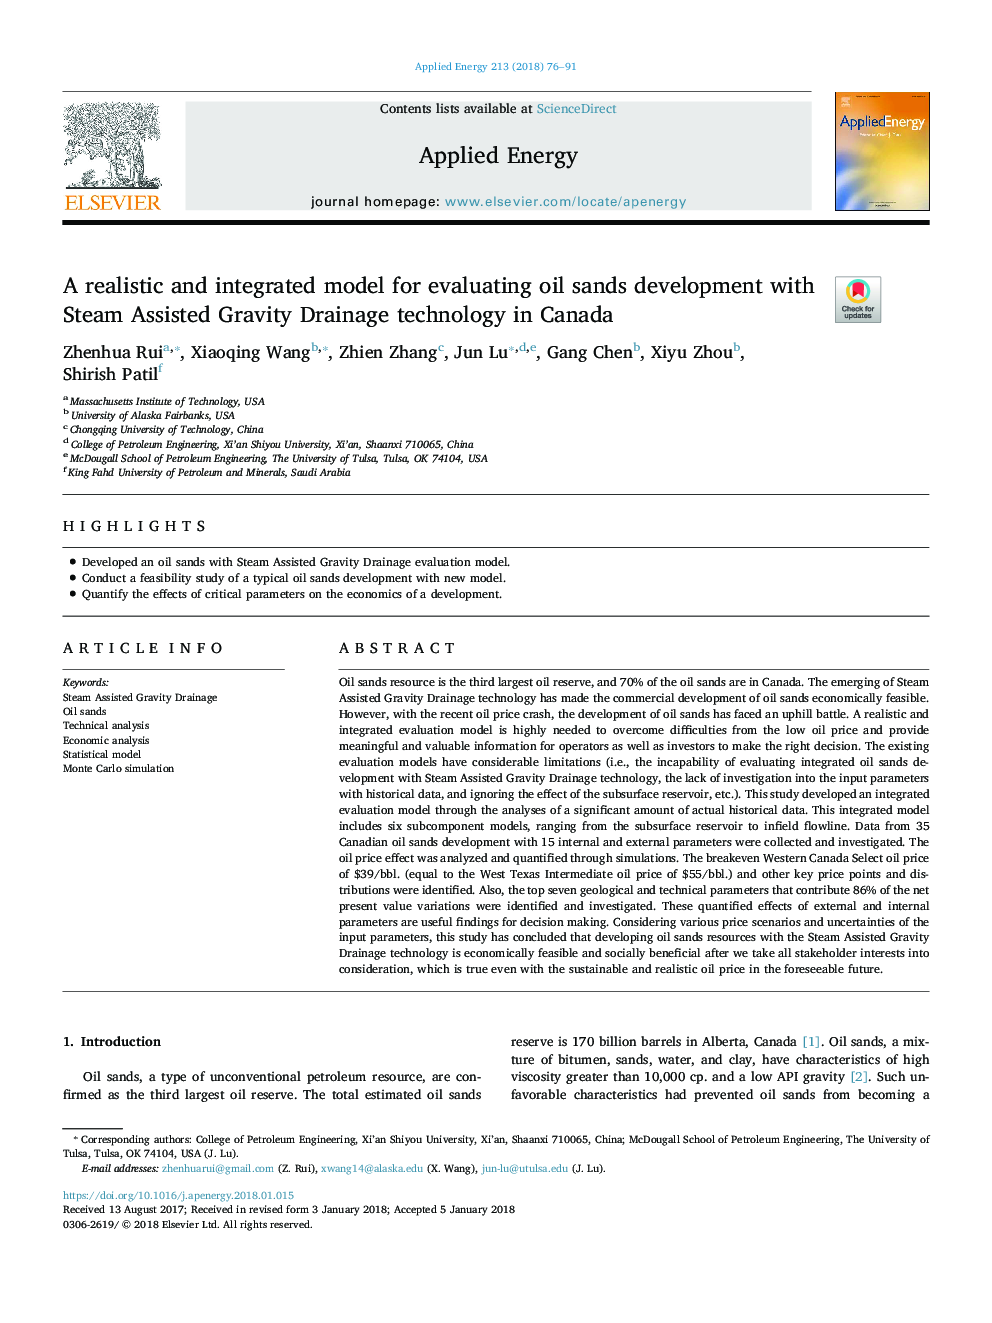 A realistic and integrated model for evaluating oil sands development with Steam Assisted Gravity Drainage technology in Canada